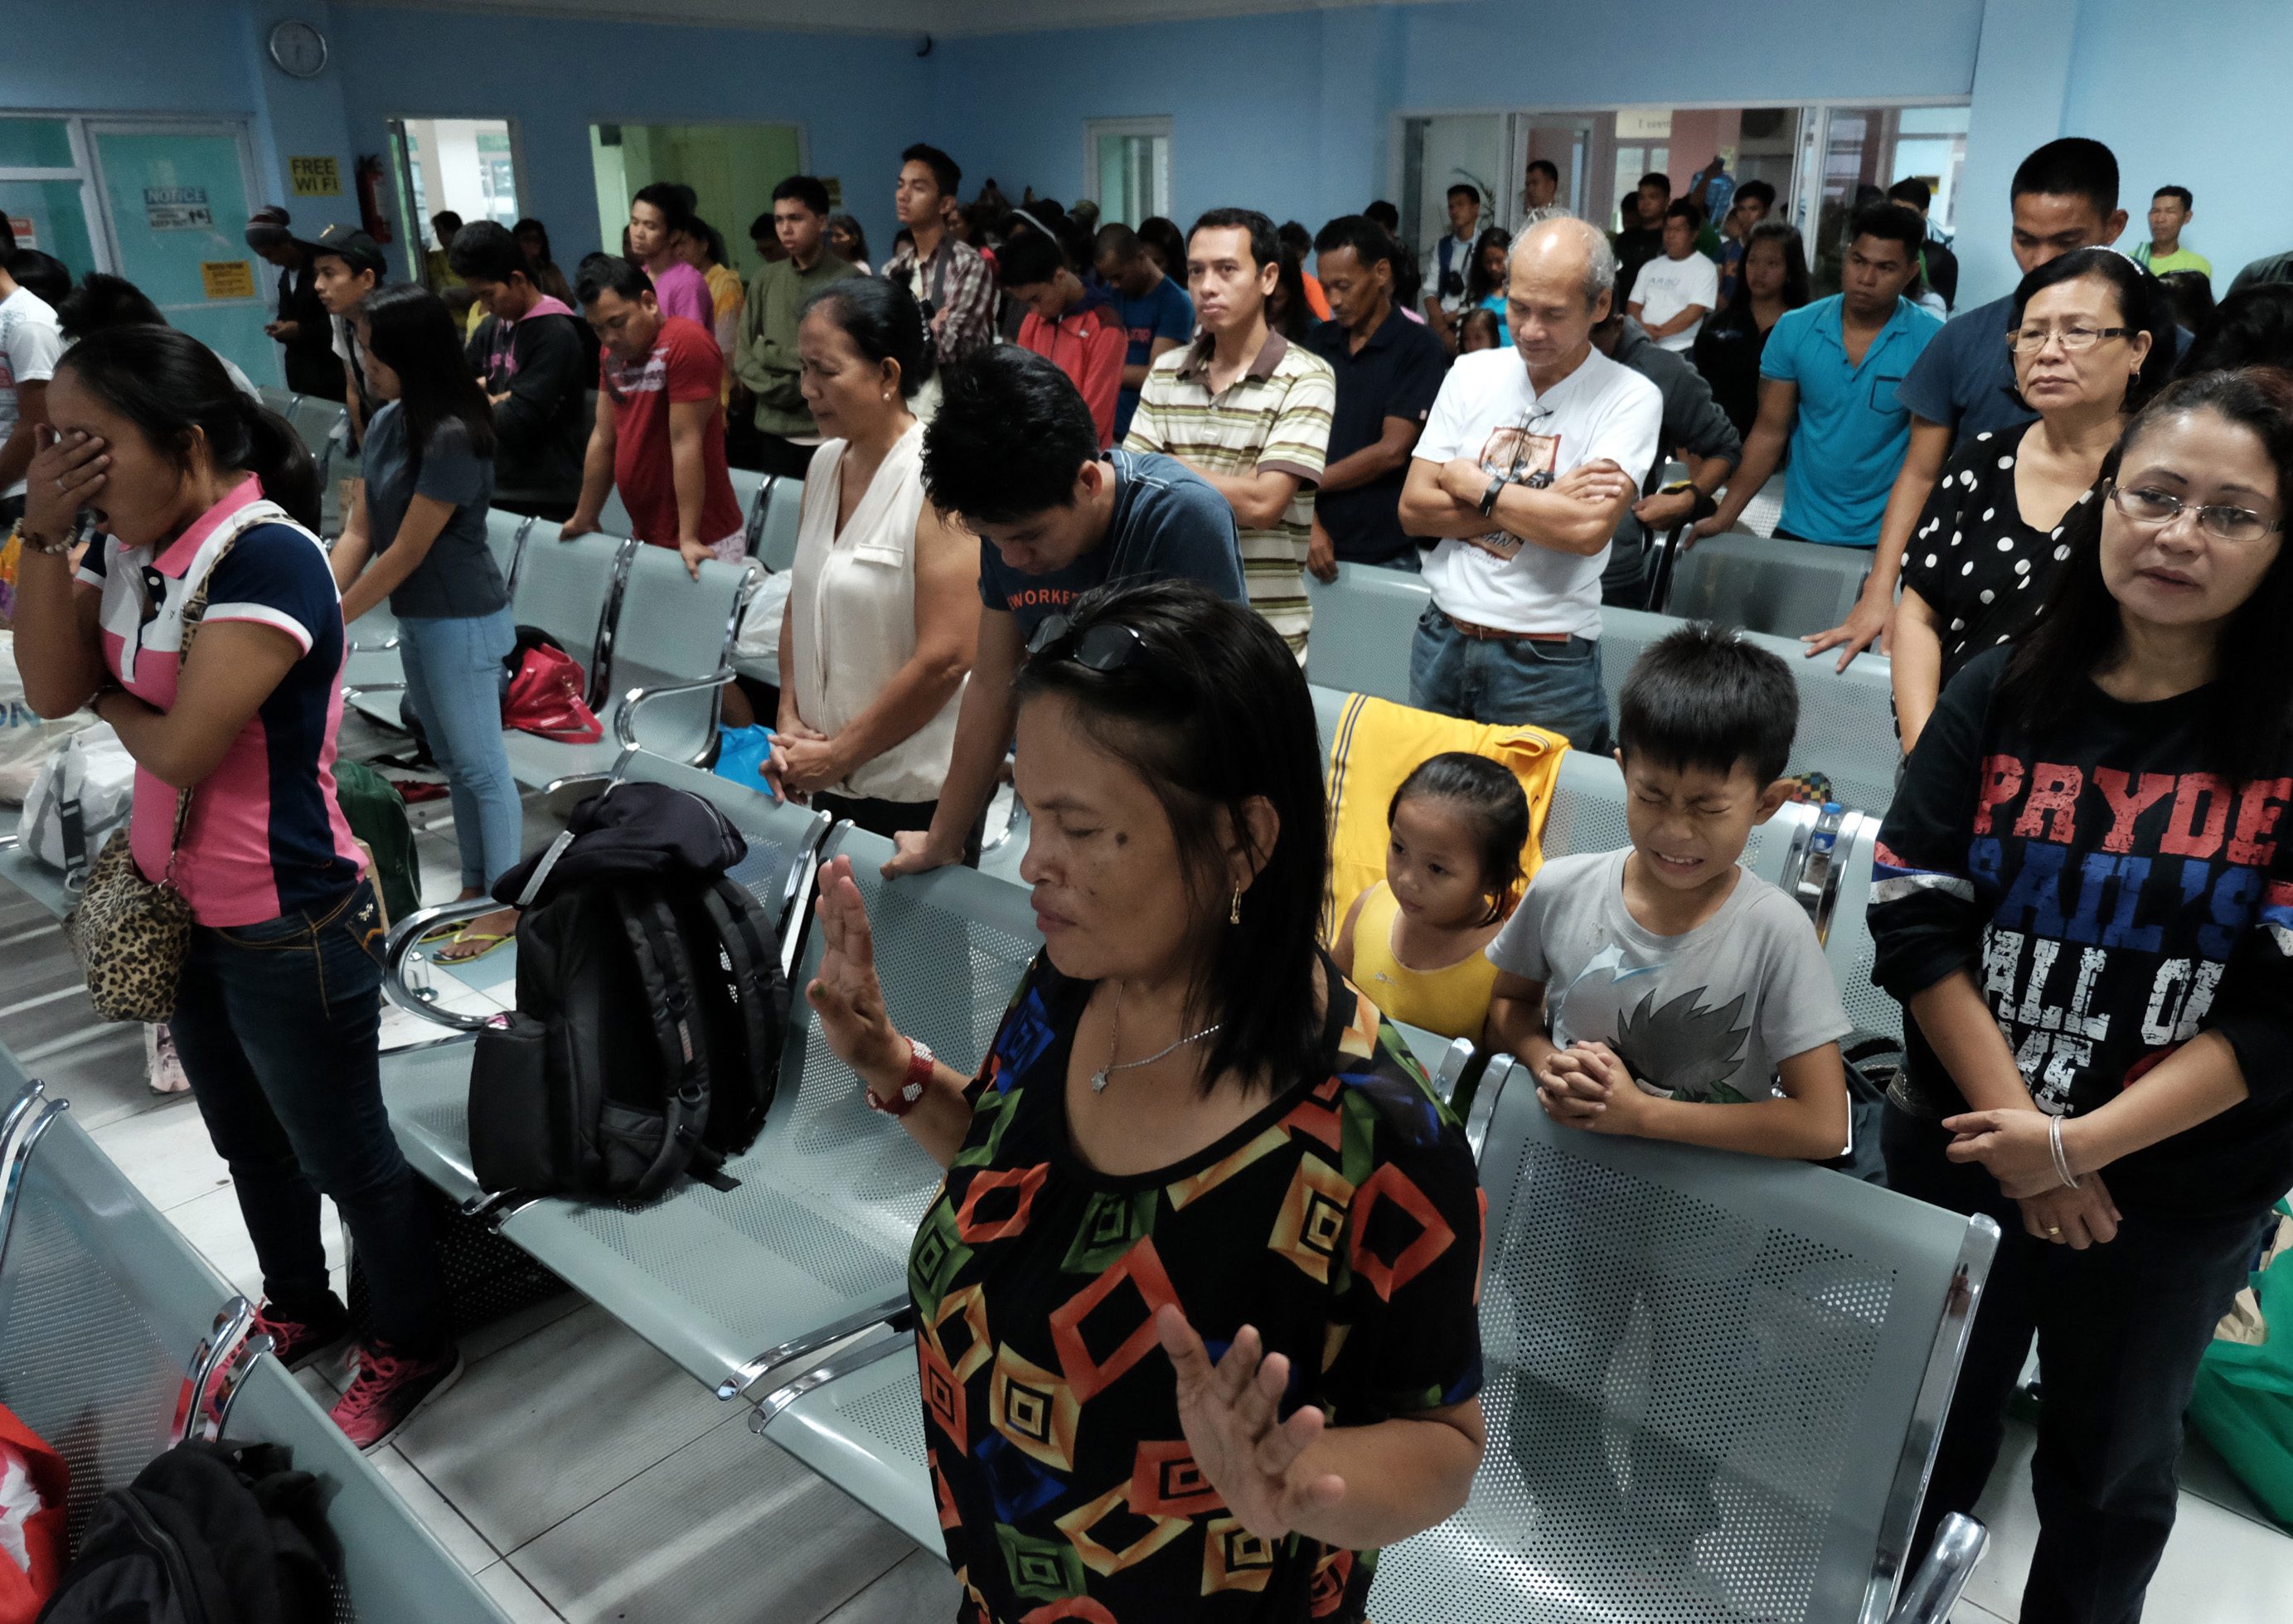 Stranded passengers offer prayers inside a port terminal in Tabaco, Albay on October 17, 2015. Photo by Zalrian Sayat/EPA 